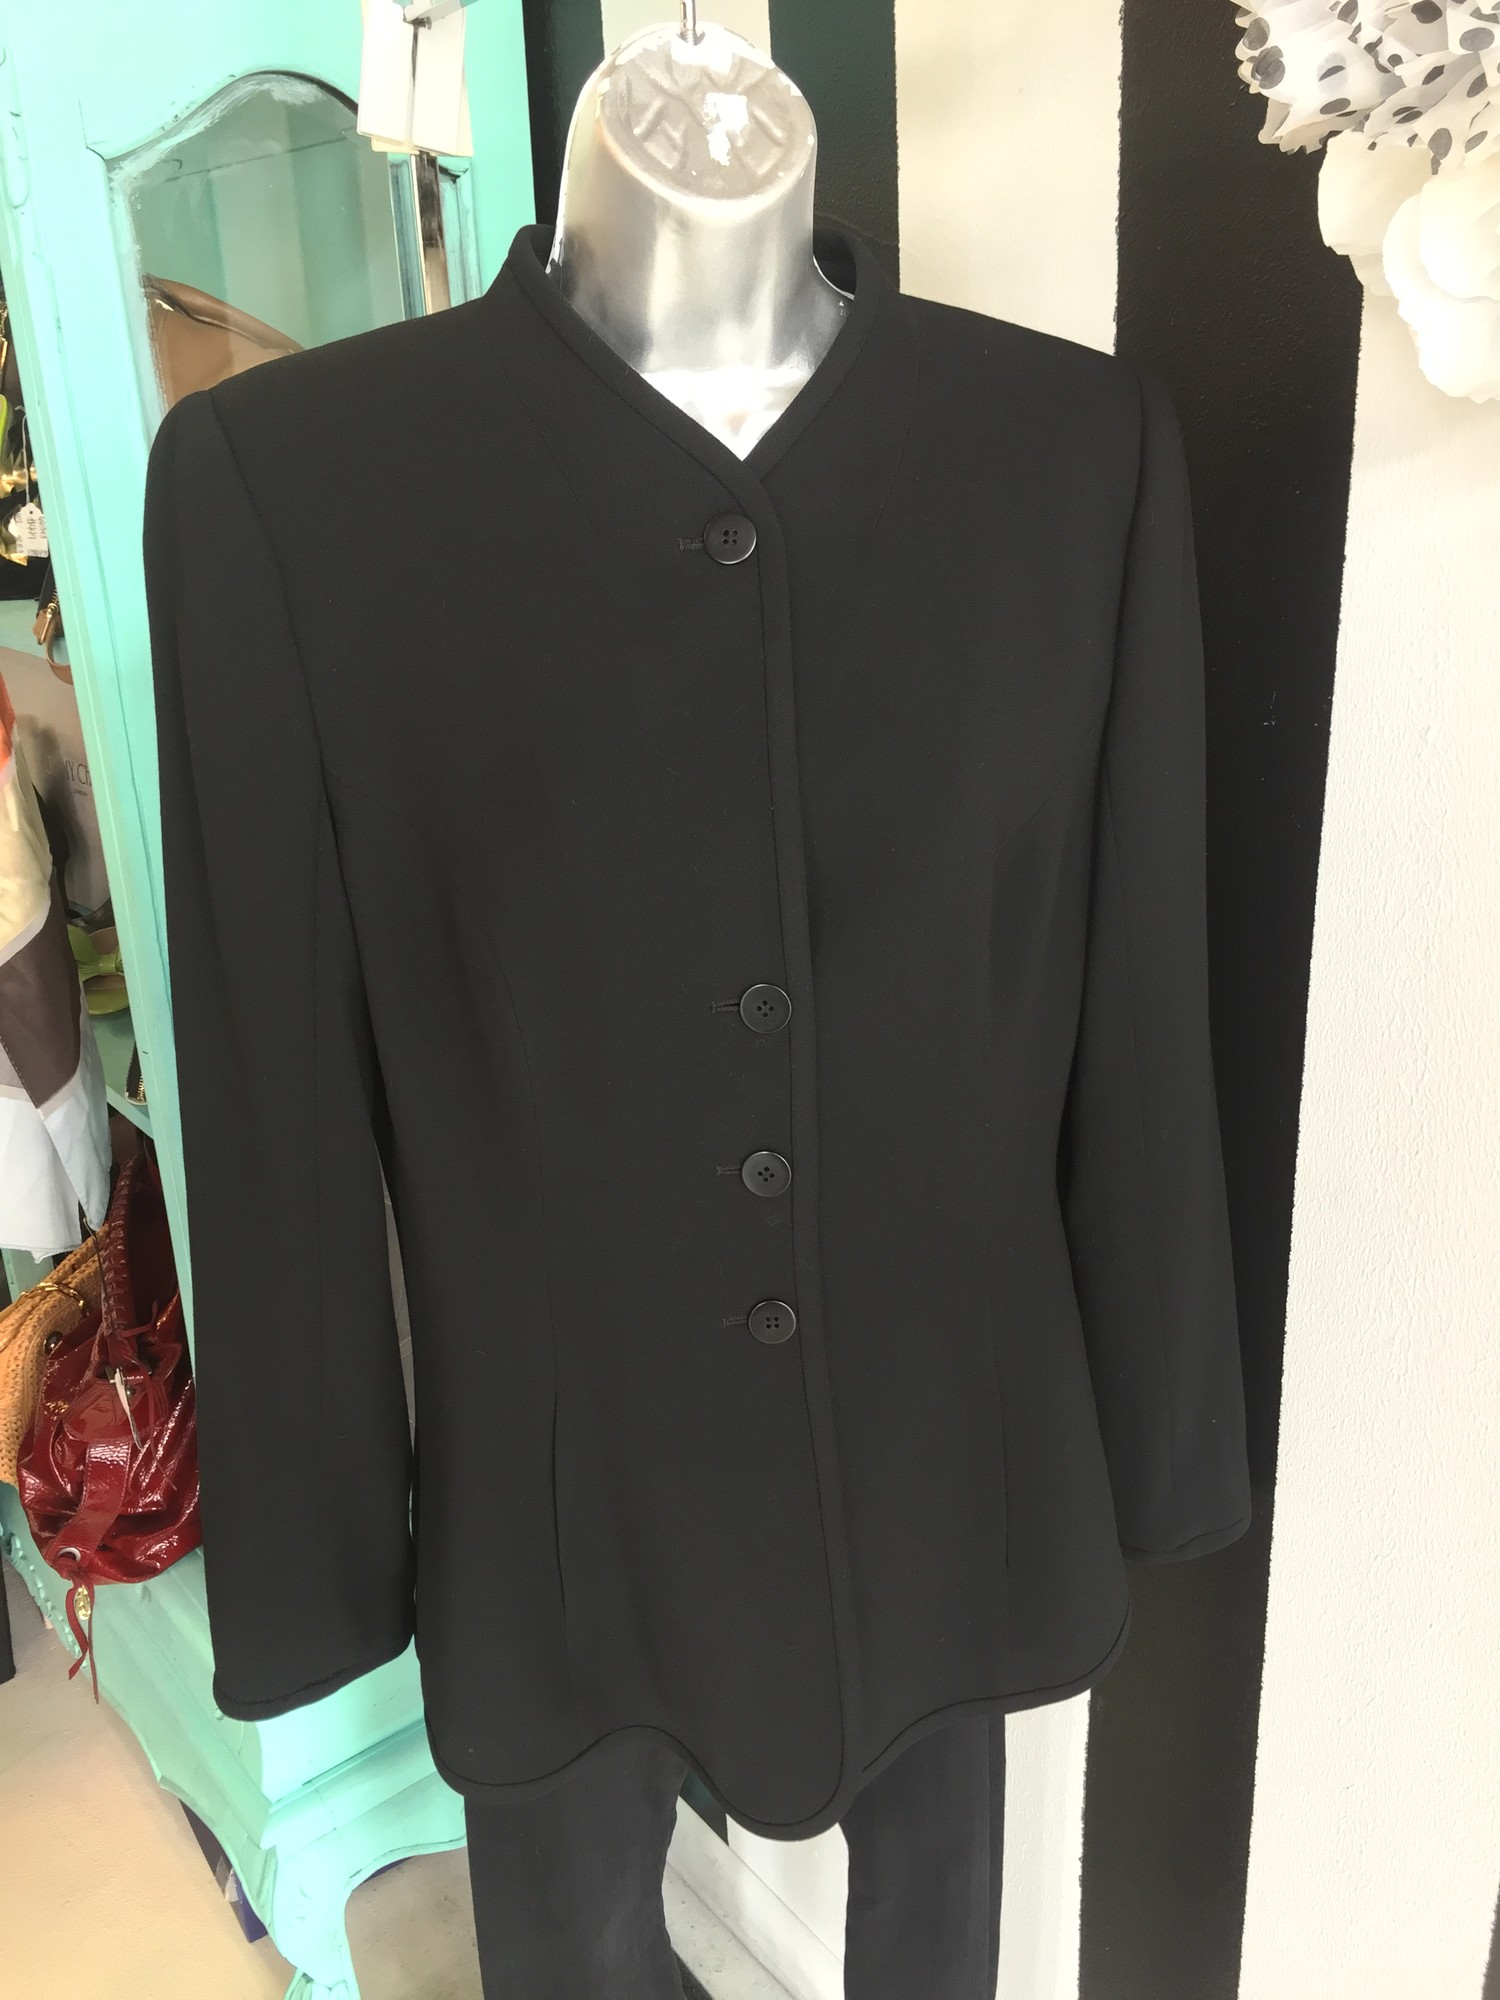 GORGEOUS Giorgio Armani jacket. Black interior and exterior. Front buttons, no collar. Gently used, no signs of use. Dry clean only. Italian size 50 (US size 16). Retail approx: $1,199. WON'T LAST!